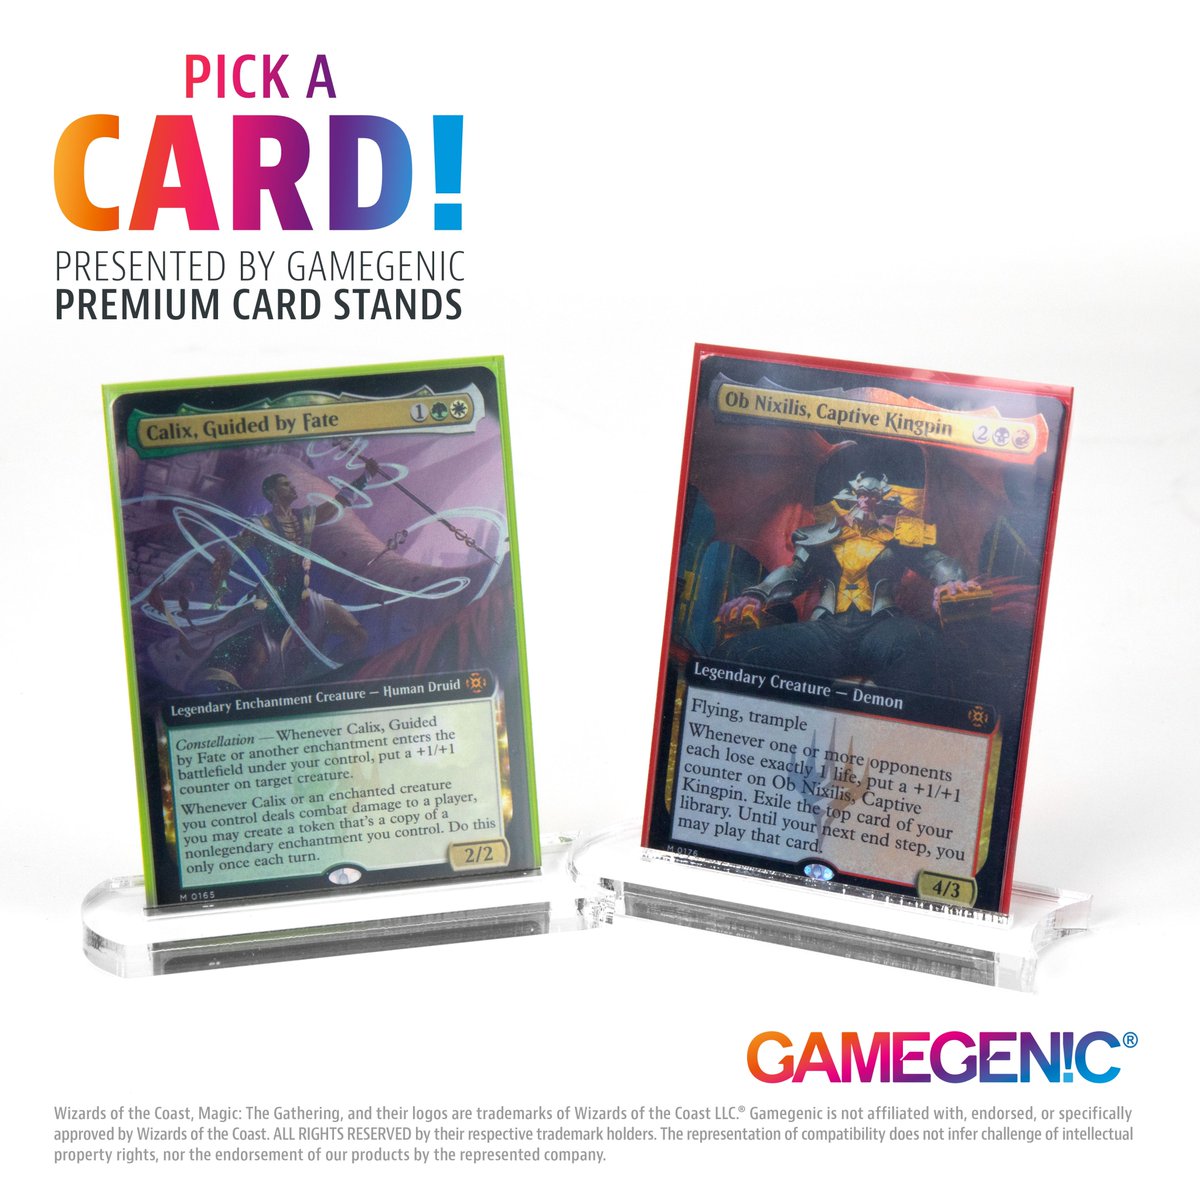 PICK A CARD!
Welcome to our new series, presented by Gamegenic Premium Card Stands!
Which one of these 'March of the Machine: The Aftermath' cards would you pick?
1⃣Ob Nixilis, Captive Kingpin
2⃣Calix, Guided by Fate
#gamegenic #cardstands #mtg #marchofthemachine #aftermath #tcg